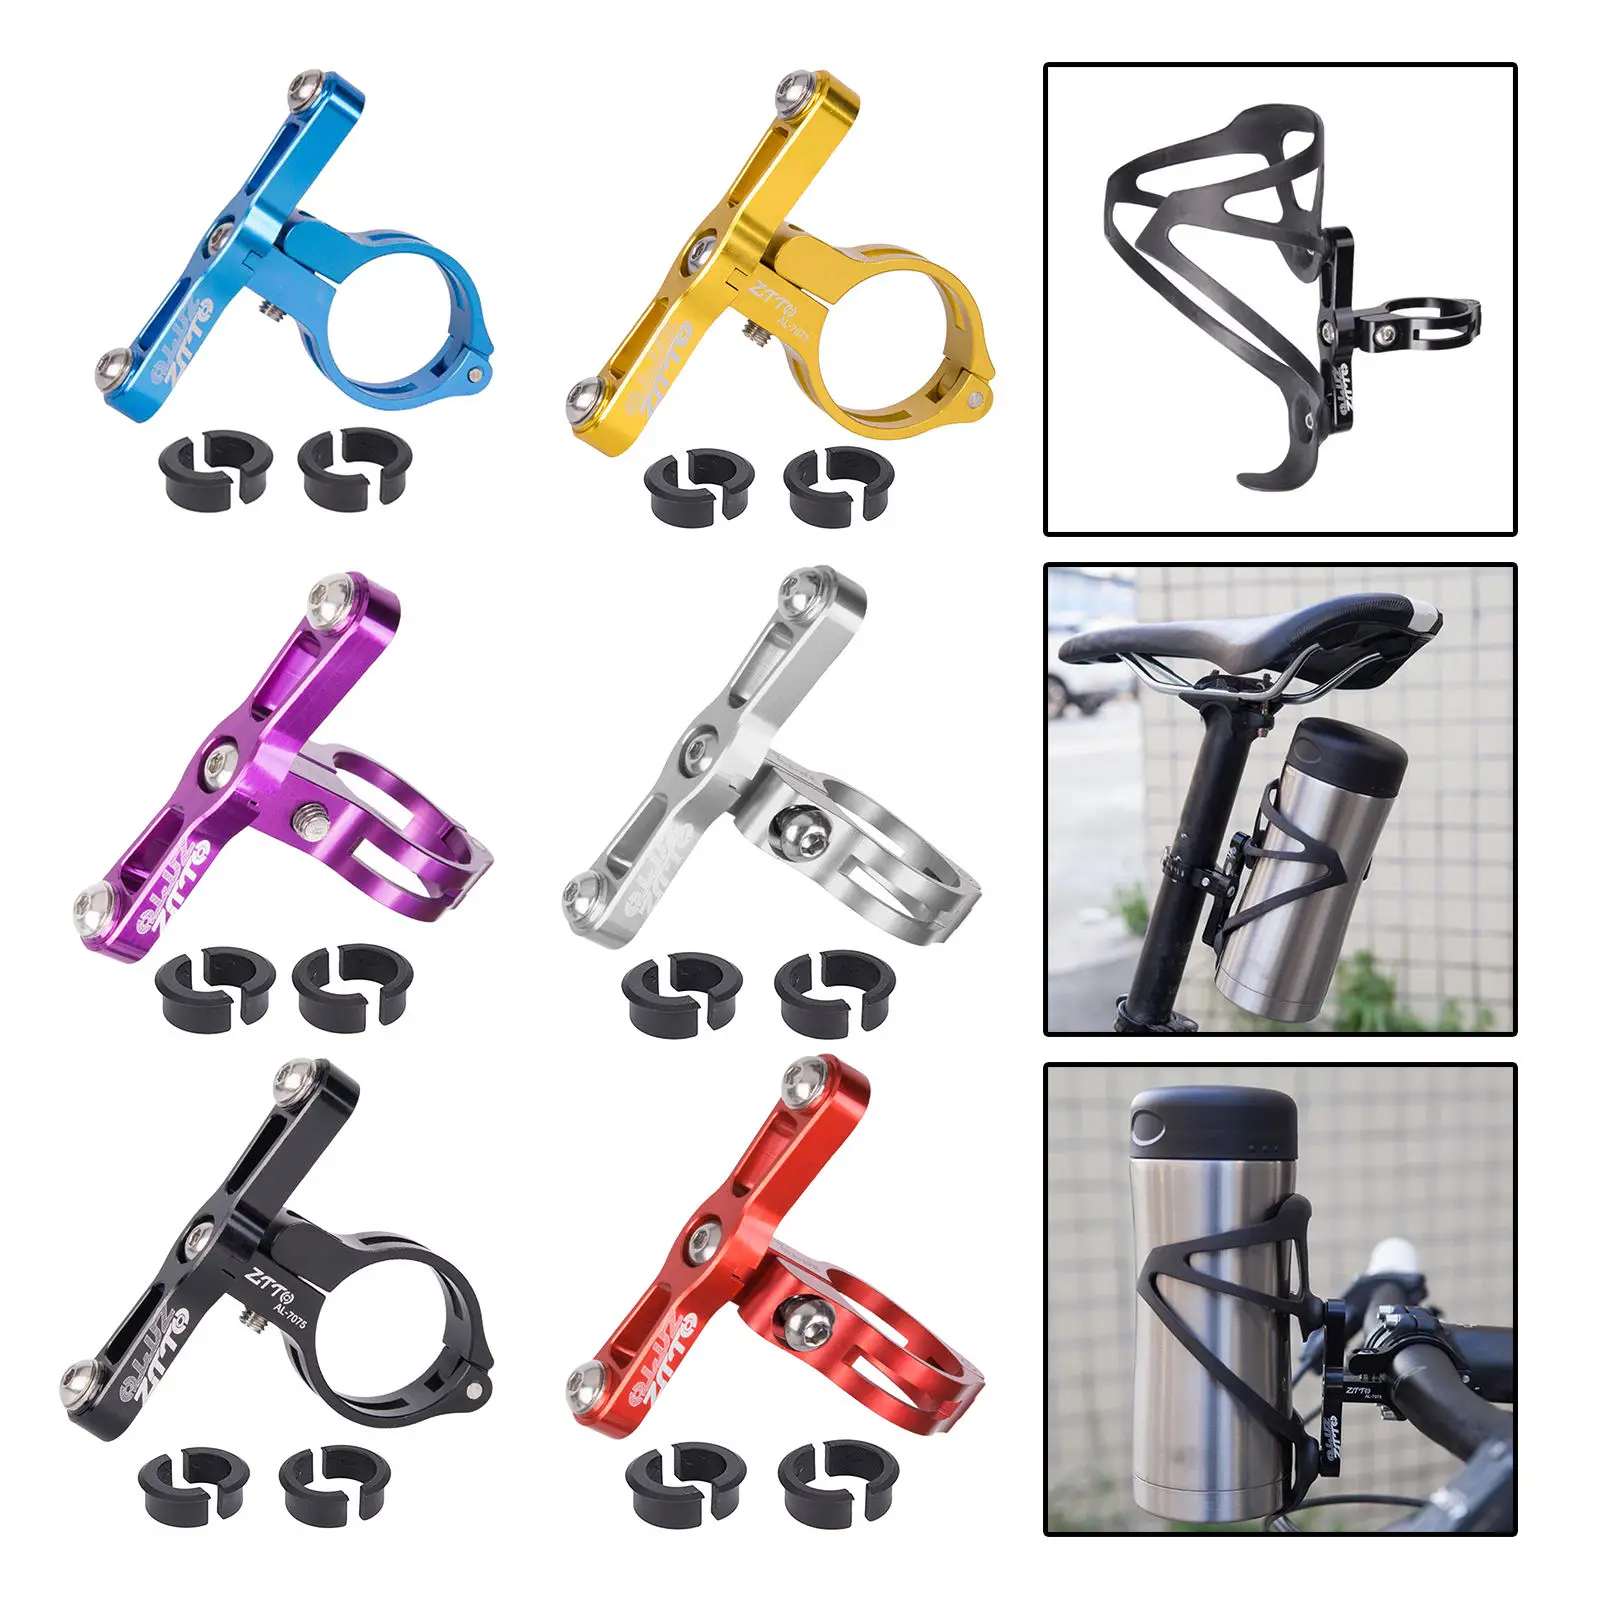 Ztto Aluminum Alloy CNC Machined Water Bottle Cage Holder Mount for 22.2mm 25.4mm 31.8mm Handlebar Seatpost 